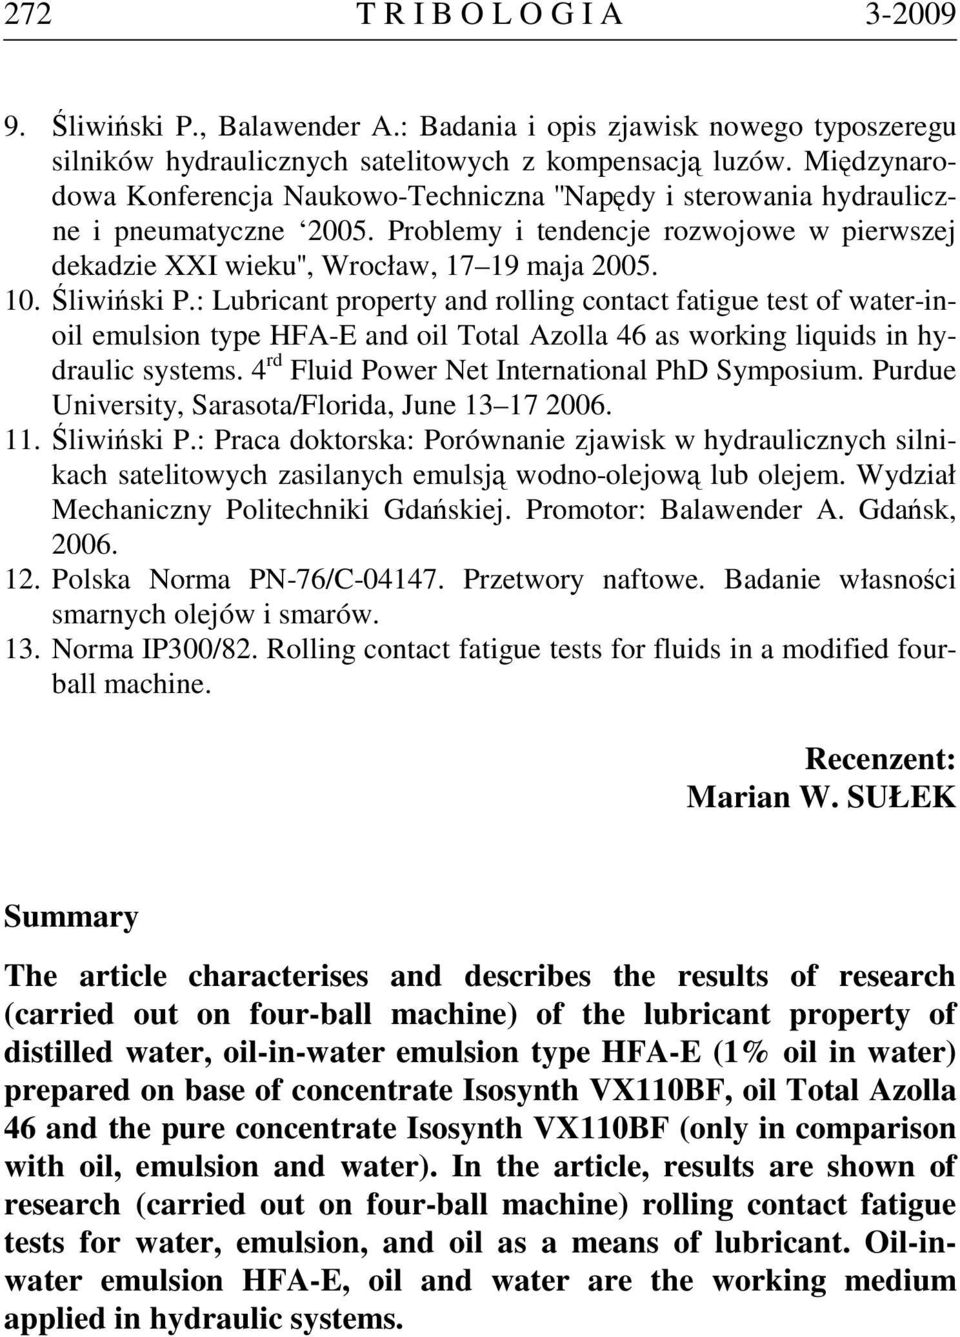 Śliwiński P.: Lubricant property and rolling contact fatigue test of water-inoil emulsion type HFA-E and oil Total Azolla 46 as working liquids in hydraulic systems.